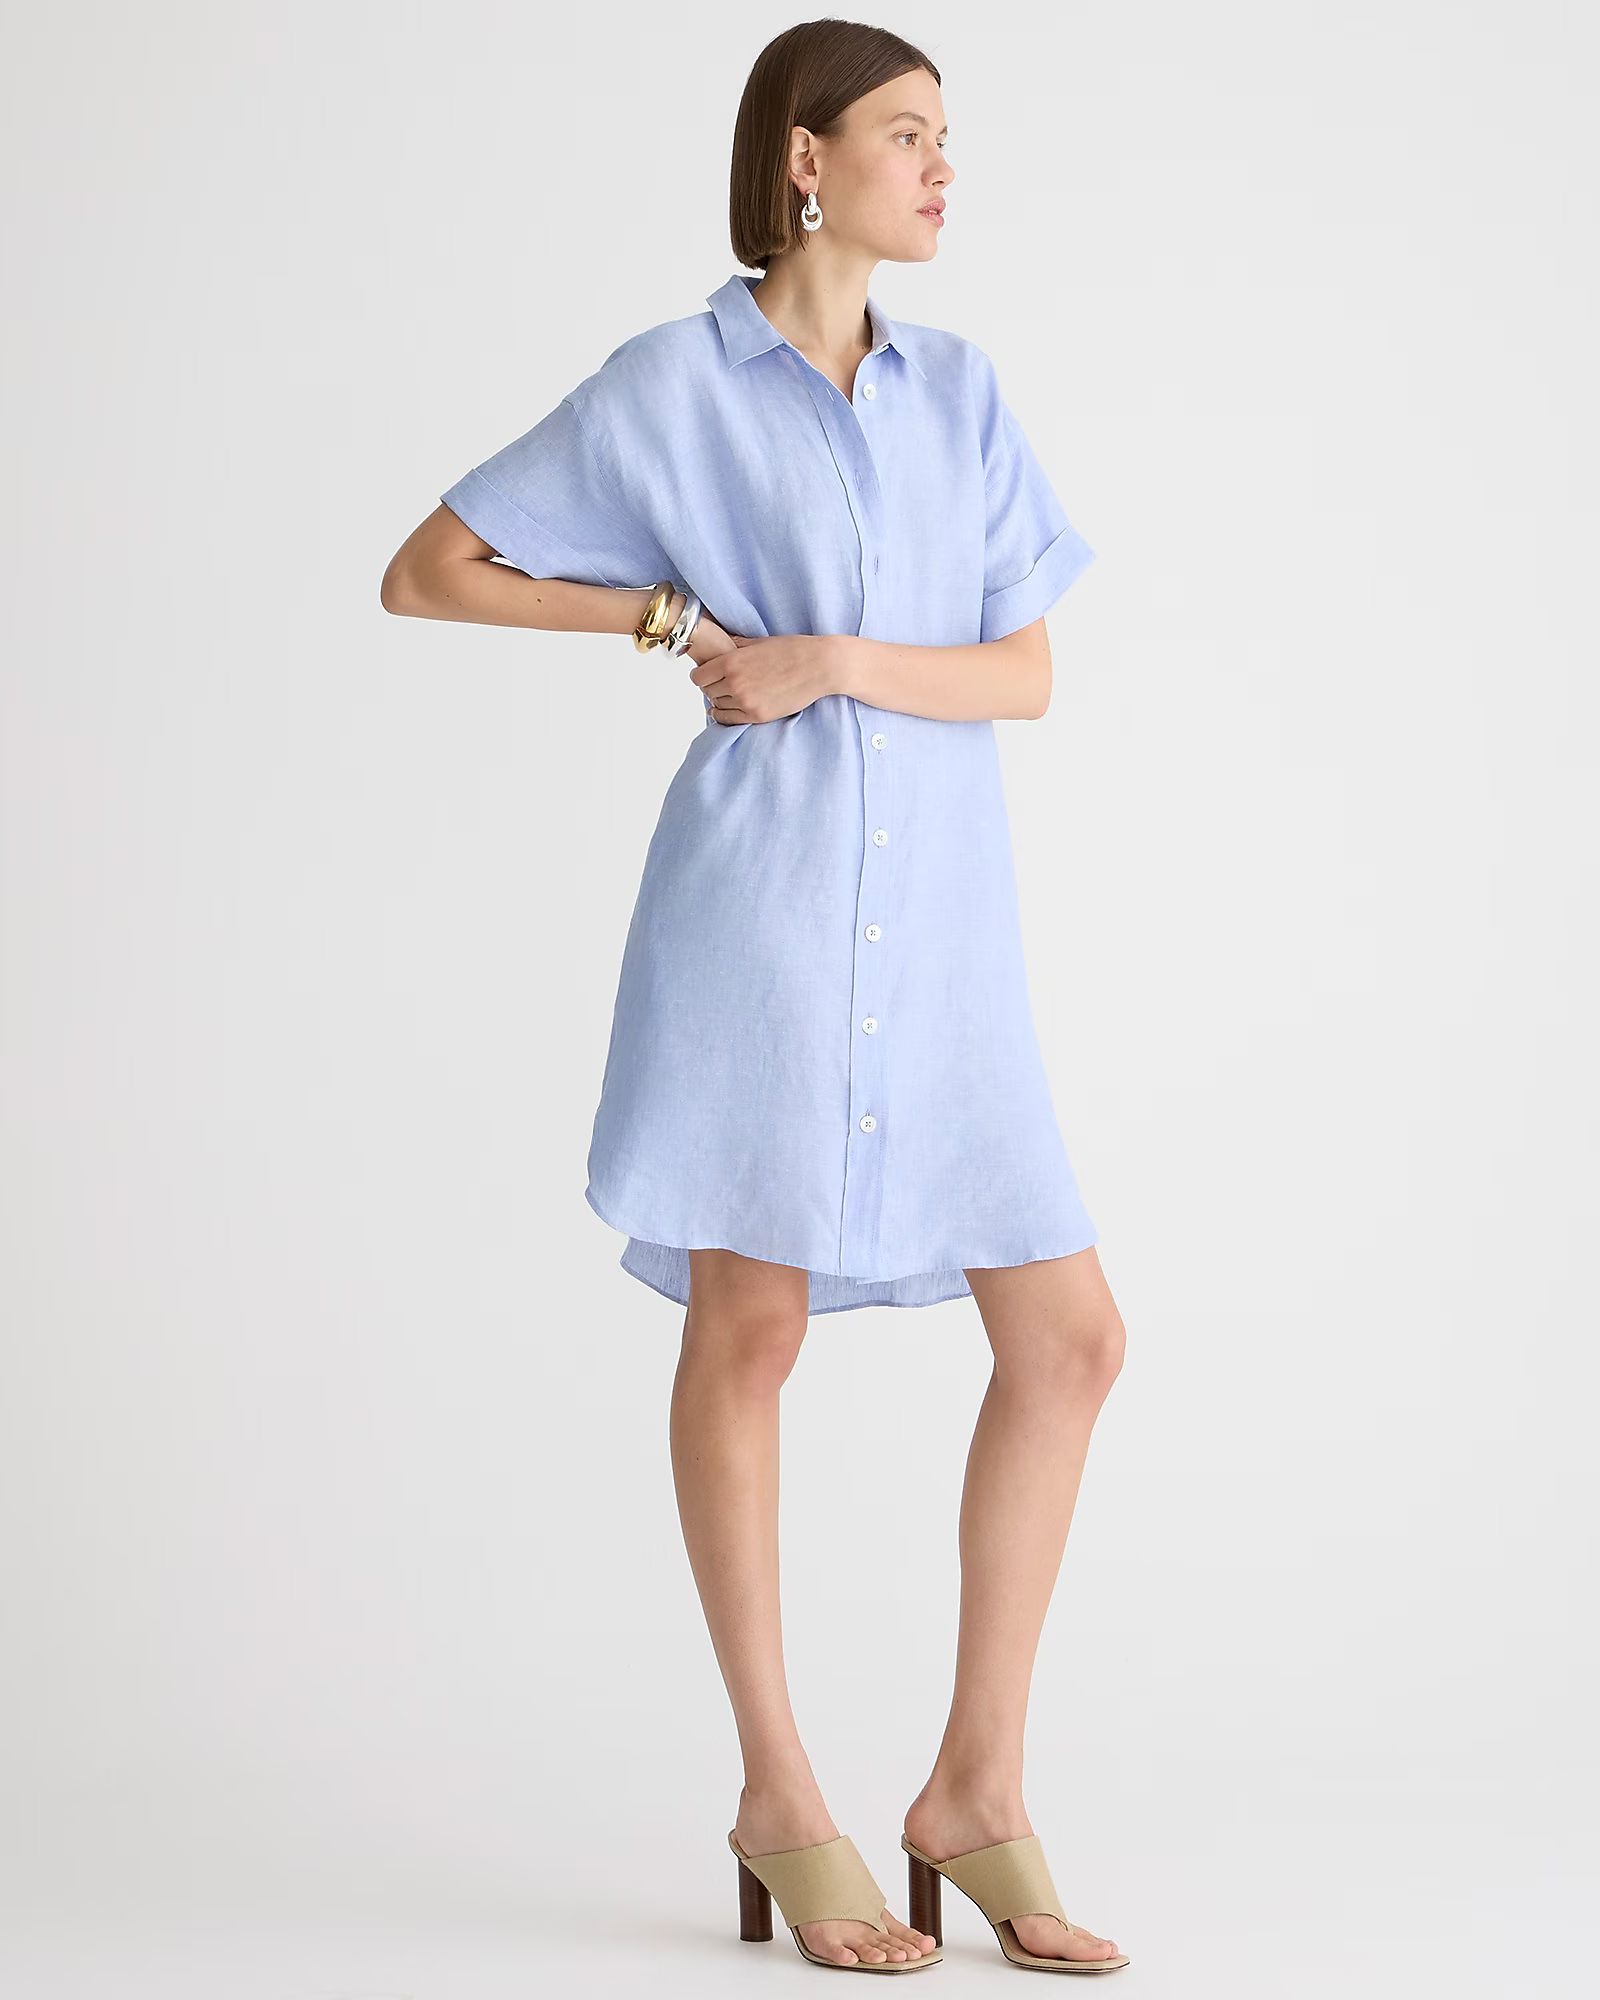 best seller4.6(54 REVIEWS)Capitaine shirtdress in linen$128.00Select Colors$69.50French Blue$69.5... | J.Crew US